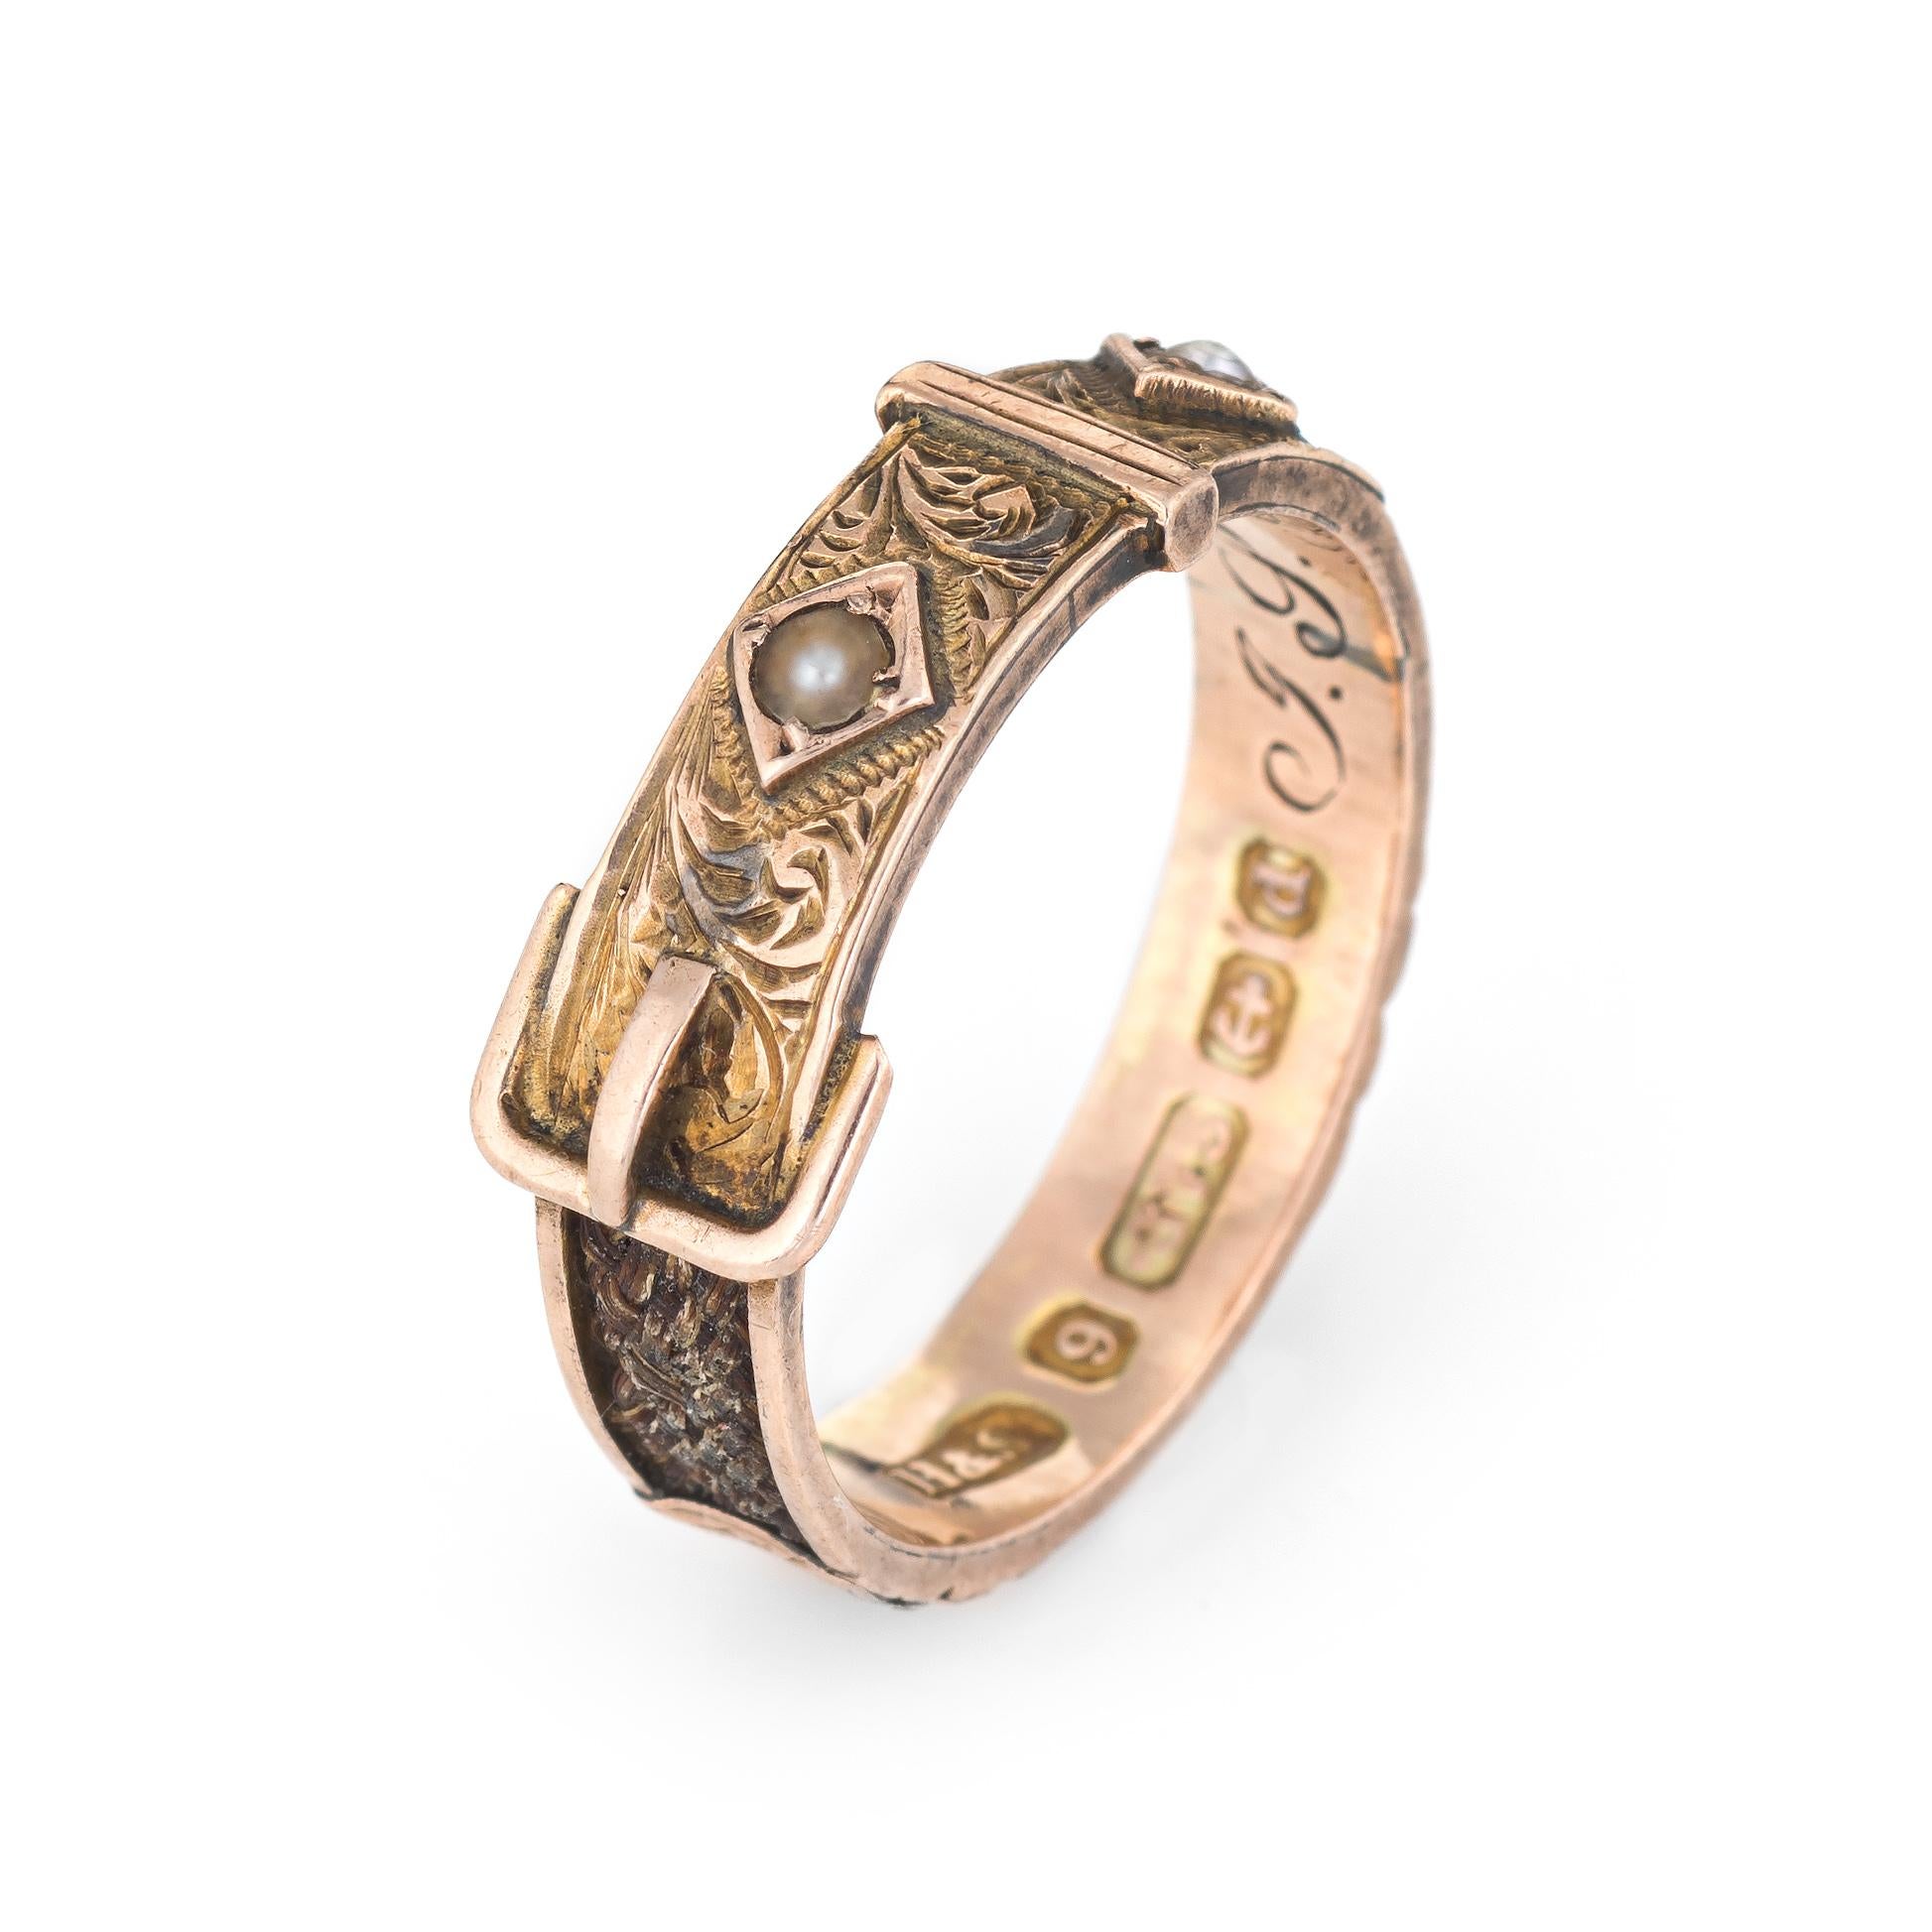 Antique Edwardian mourning ring (circa 1903), crafted in 9 karat rose gold. 

The antique ring features braided hair embedded into the band. Sectioned panels are etched in a star and foliate design. Hair is missing at the base of the ring (see